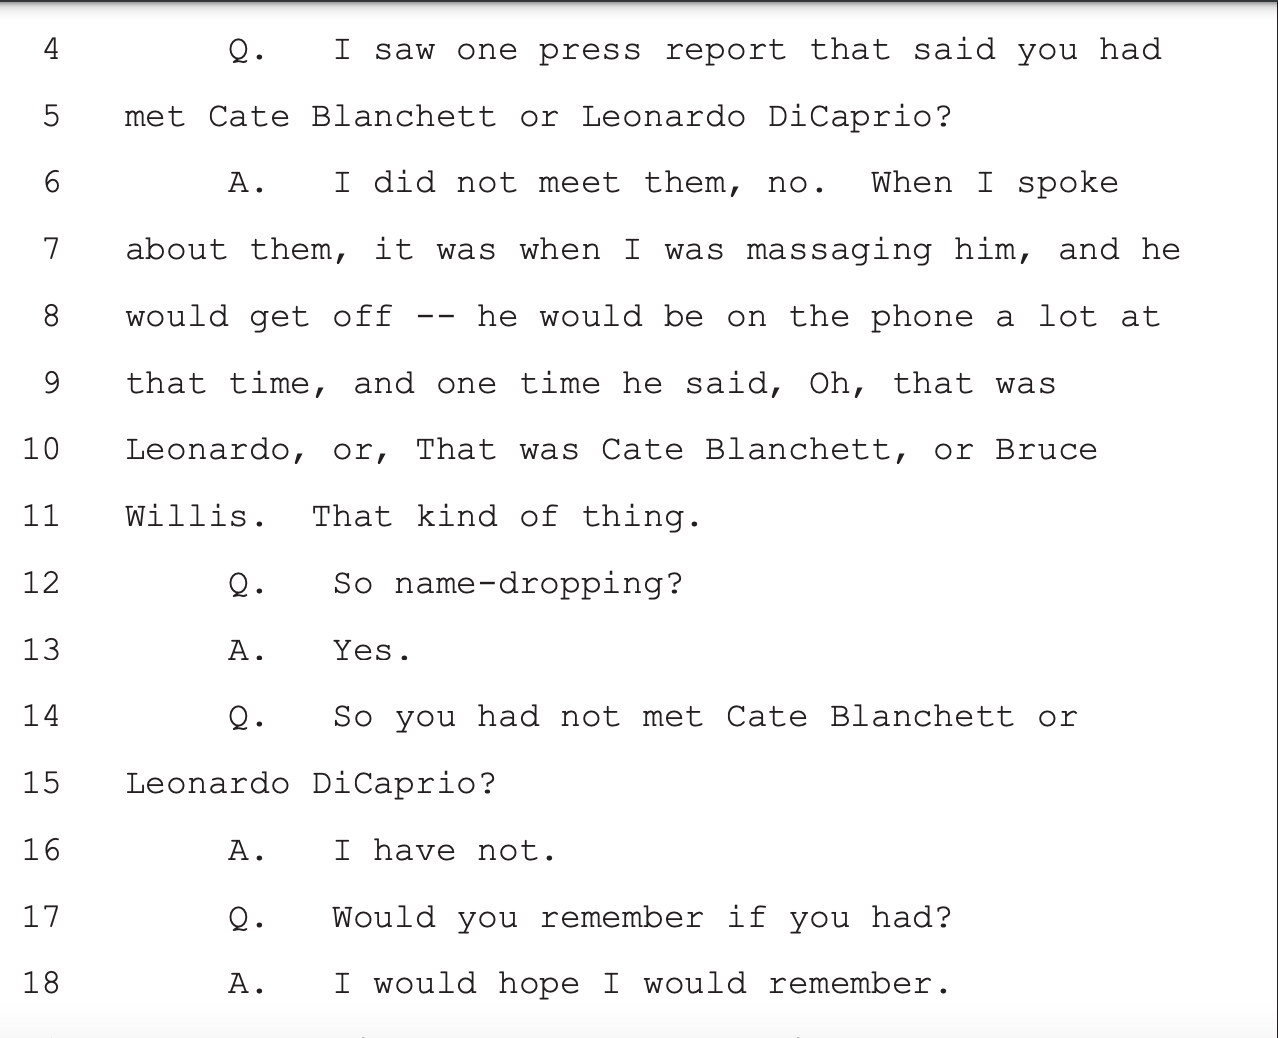 Epstein witness denies meeting DiCaprio and Blanchett in documents